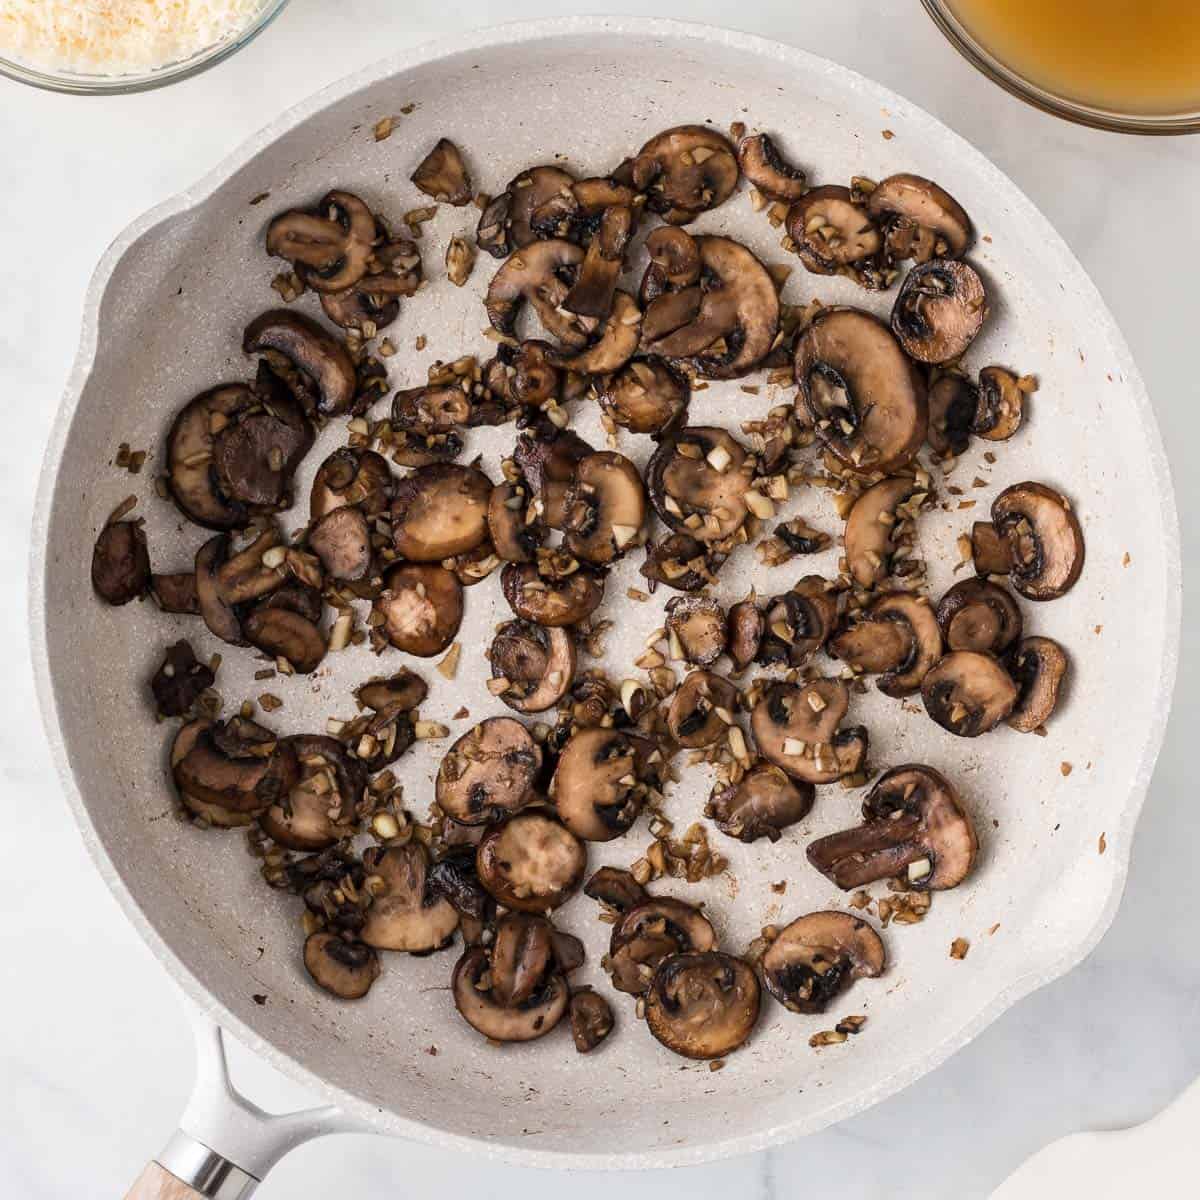 cooked down mushrooms and garlic in a skillet